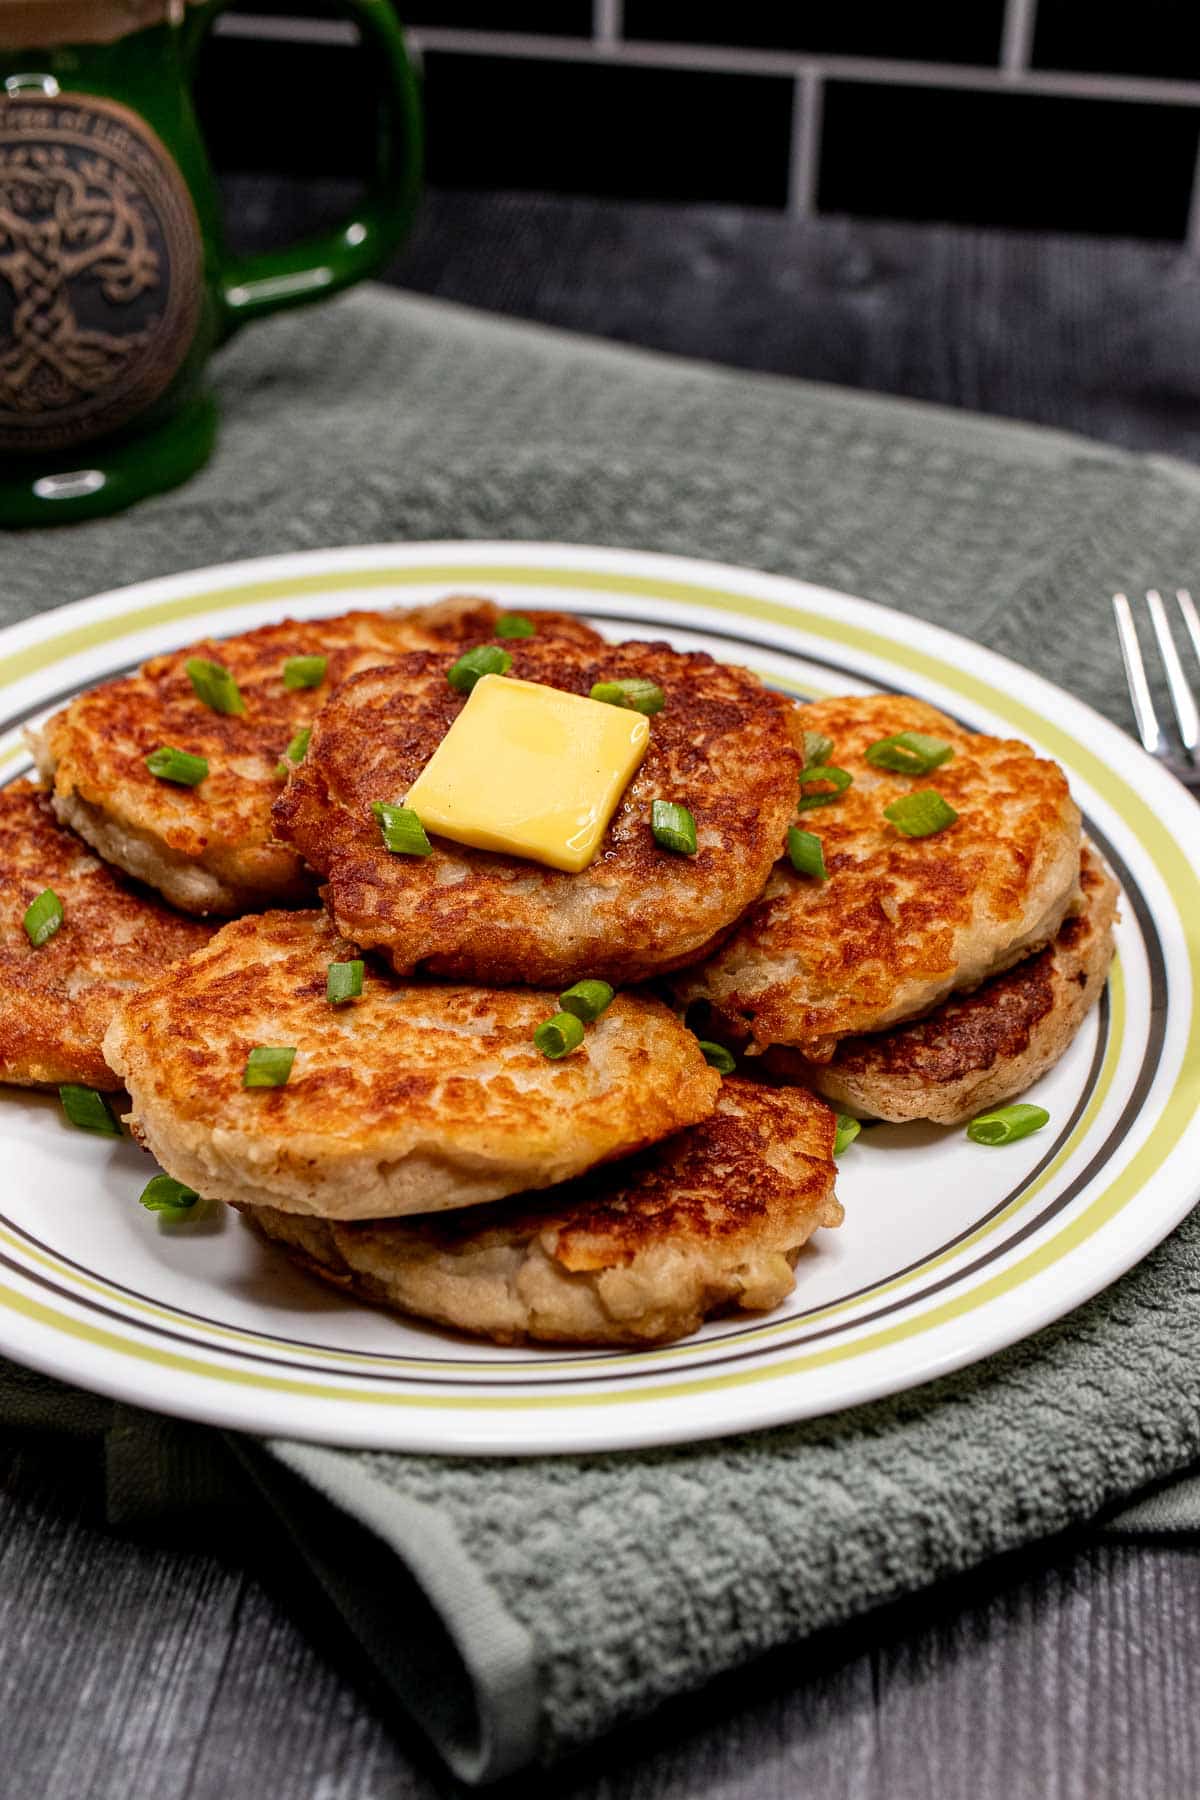 Plate of Irish potato pancakes with a green teacup behind them.